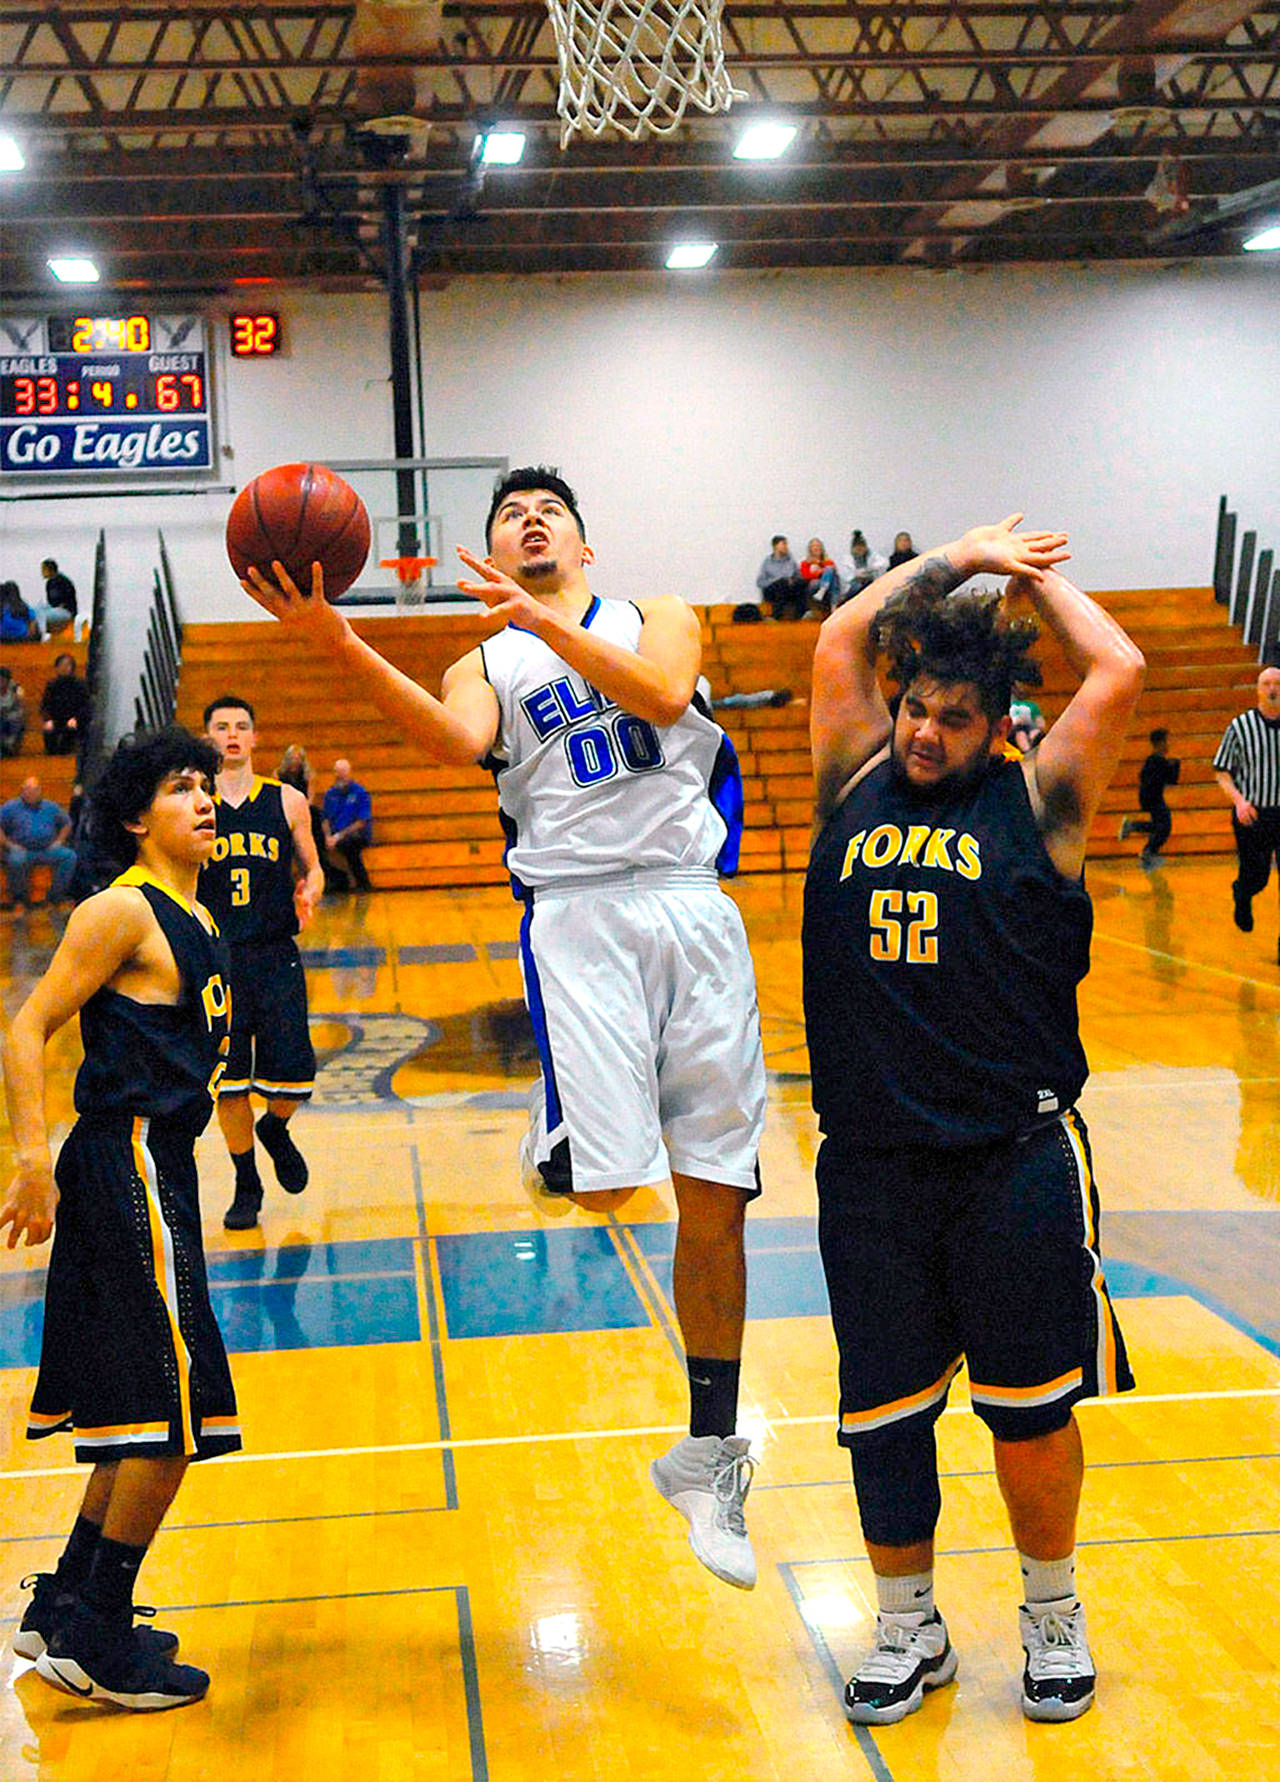 Elma’s Jesus Torres, center, drives the lane while defended by Forks’ Tony Flores, left, and Iziah Morton, right during a 2018 game. The Forks Booster Club will raffle off a gift basket to benefit Torres, an Elma senior who is battling leukemia, at Friday’s game in Forks. (Hasani Grayson/Grays Harbor News Group)